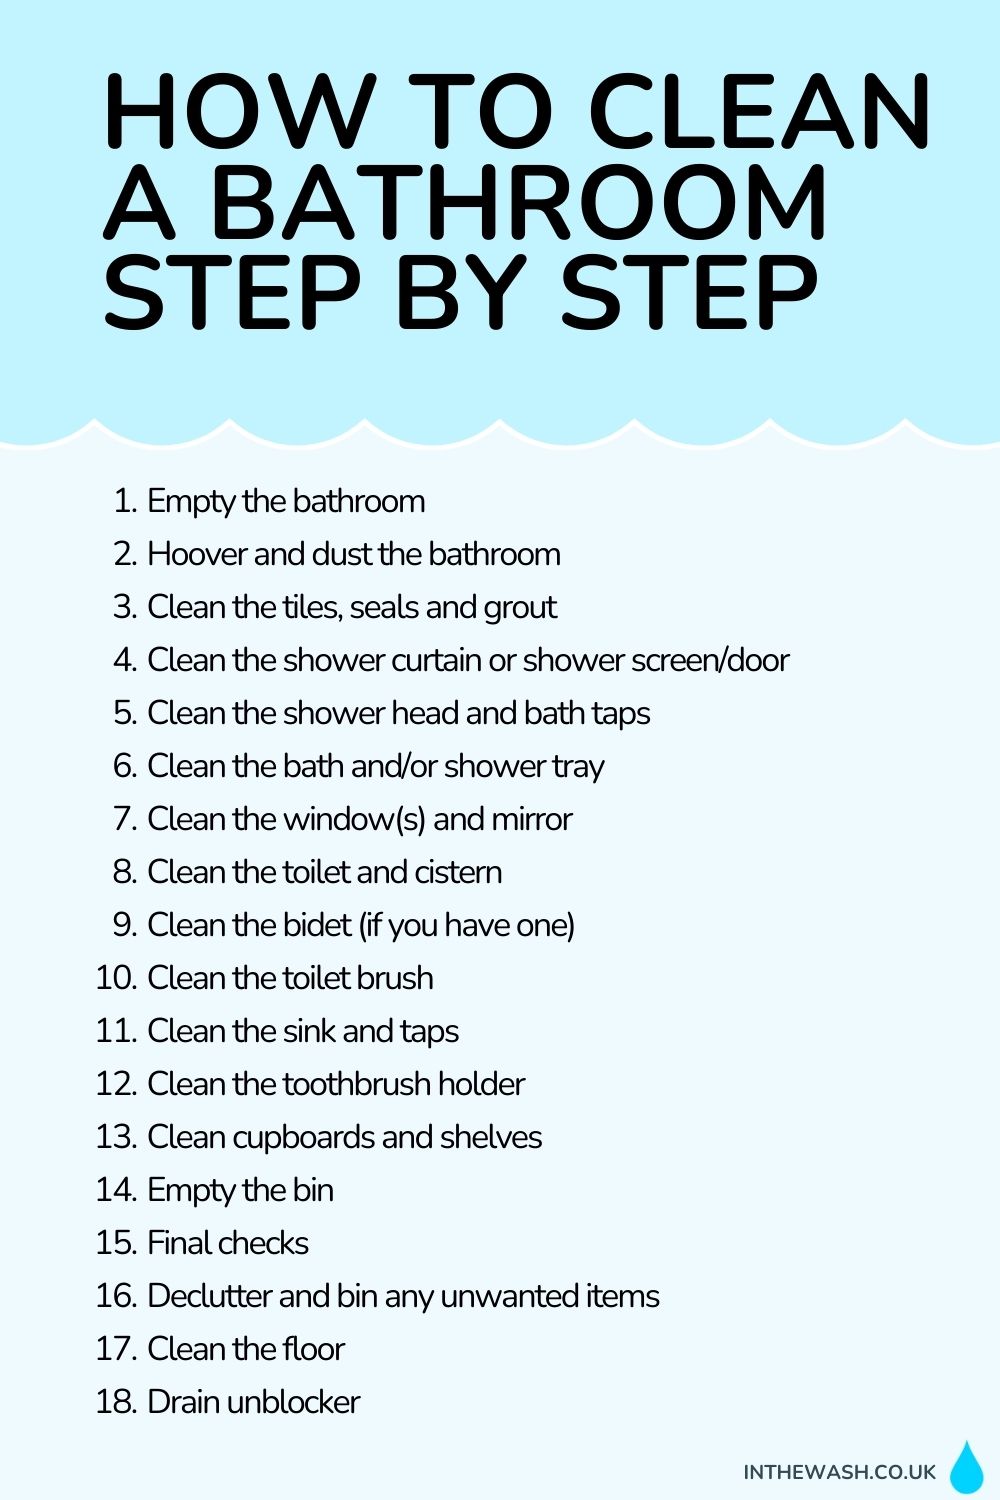 How to Clean a Bathroom Step By Step